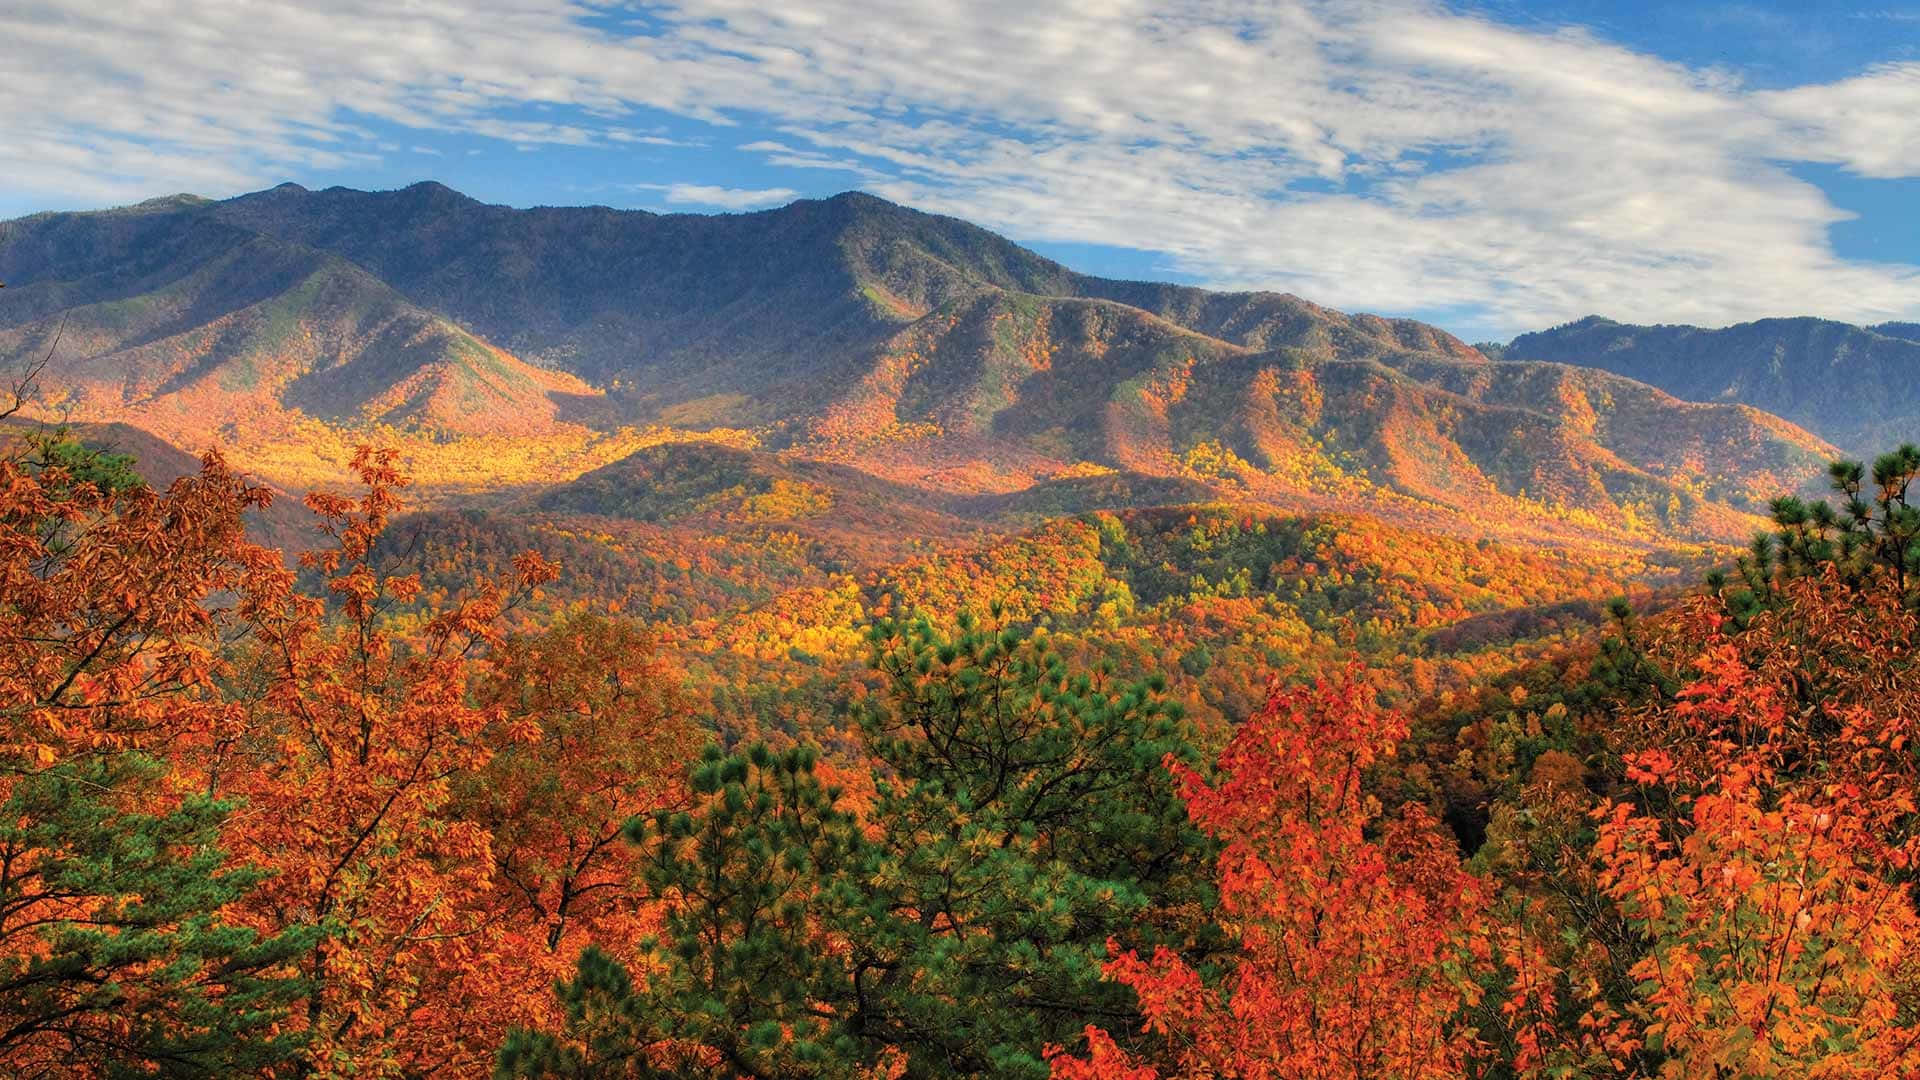 A tranquil landscape of rolling hills and stunning views of the Blue Ridge Mountains. Wallpaper